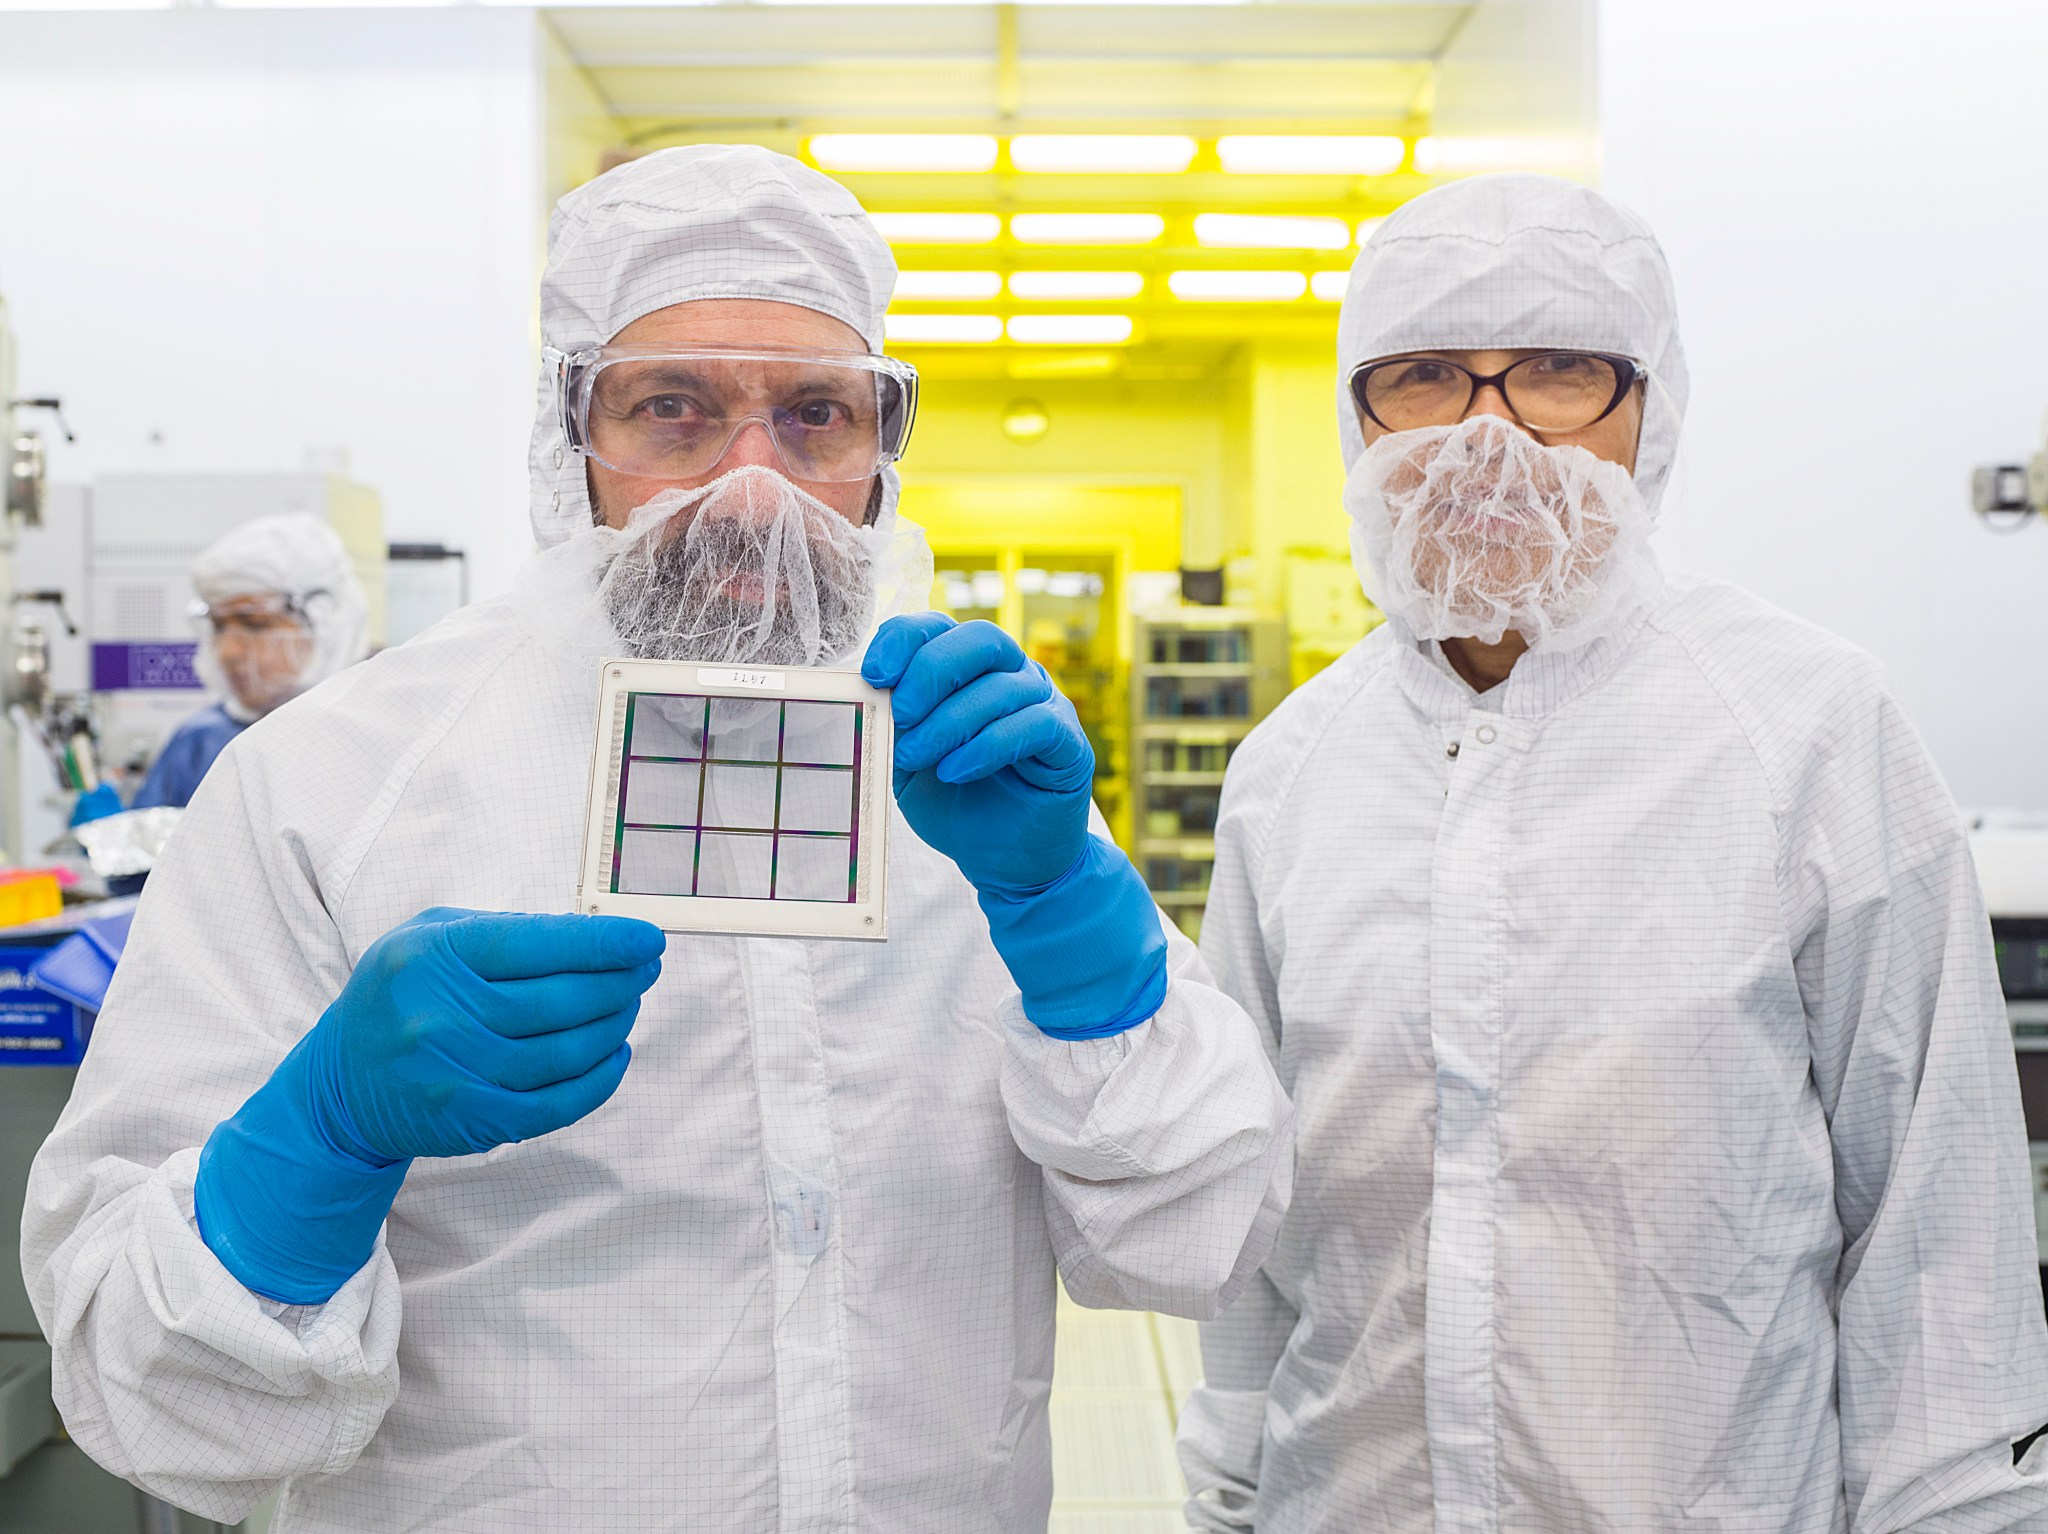 Matt Greenhouse (left) and Mary Li (right) are developing the Next-Generation Microshutter Array.